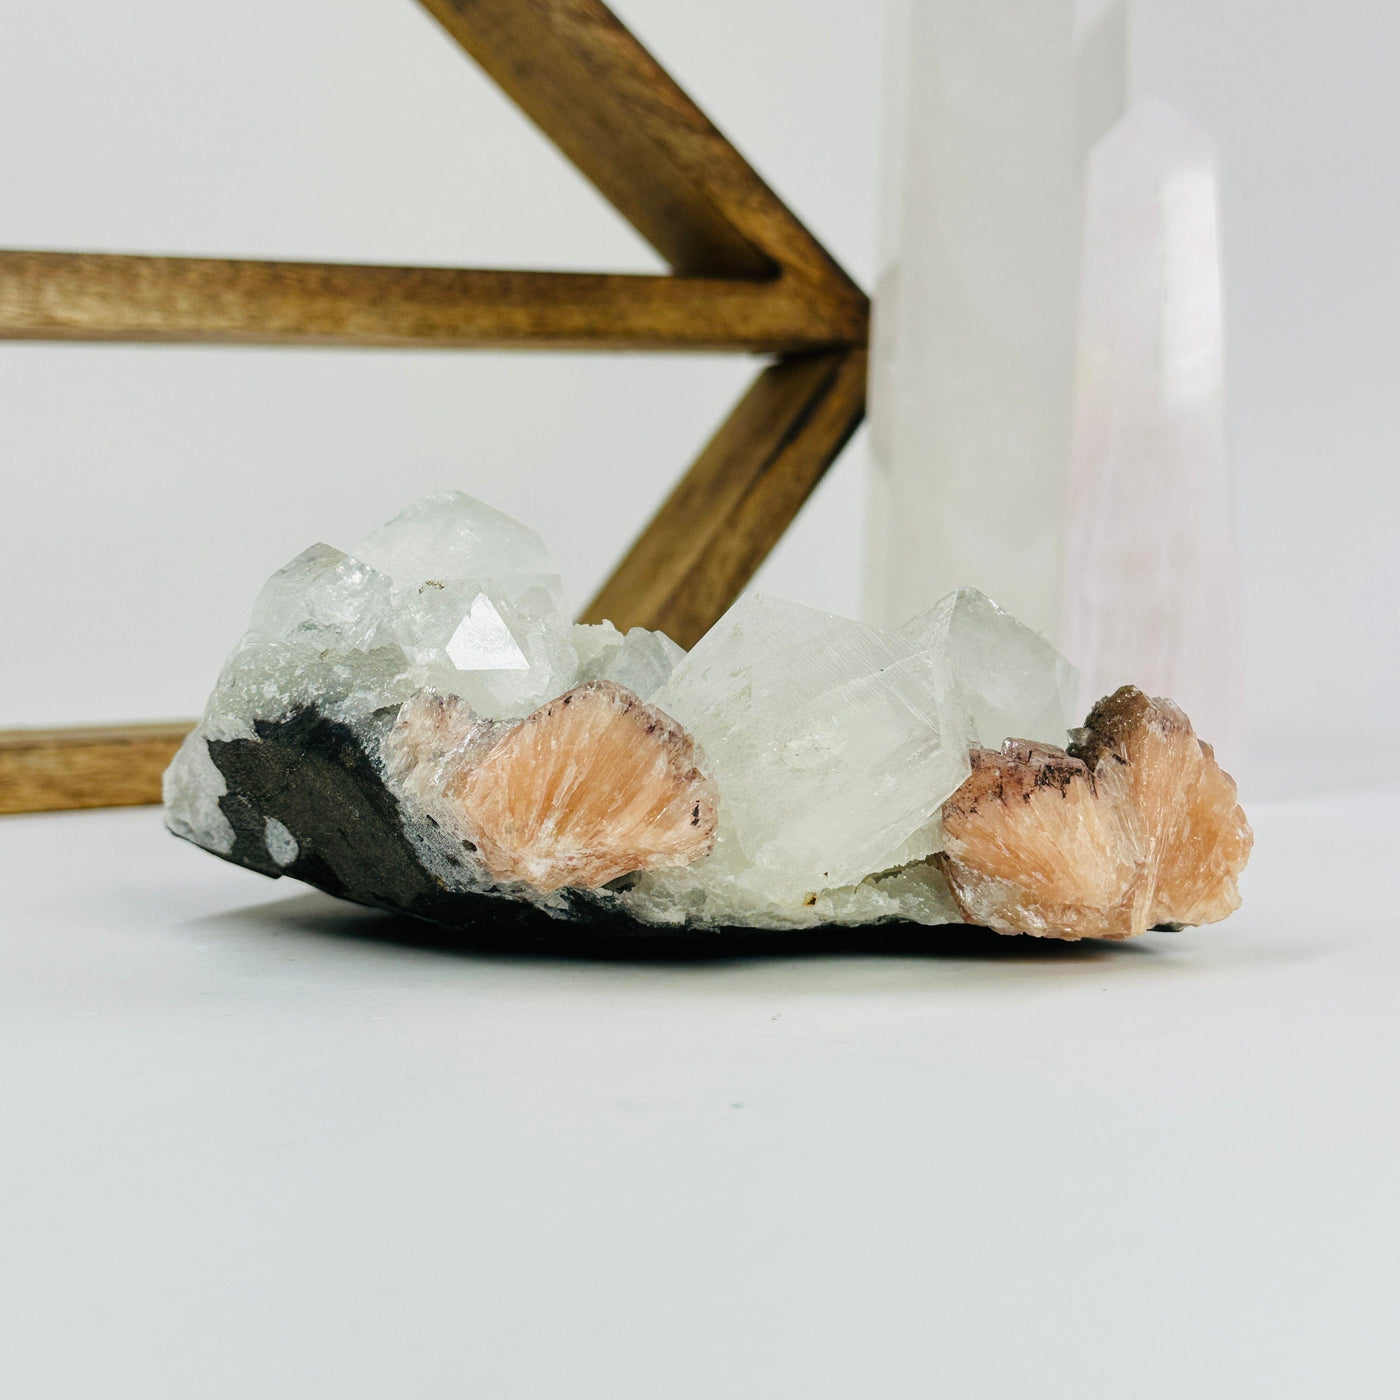 stilbite with apophyllite with decorations in the background